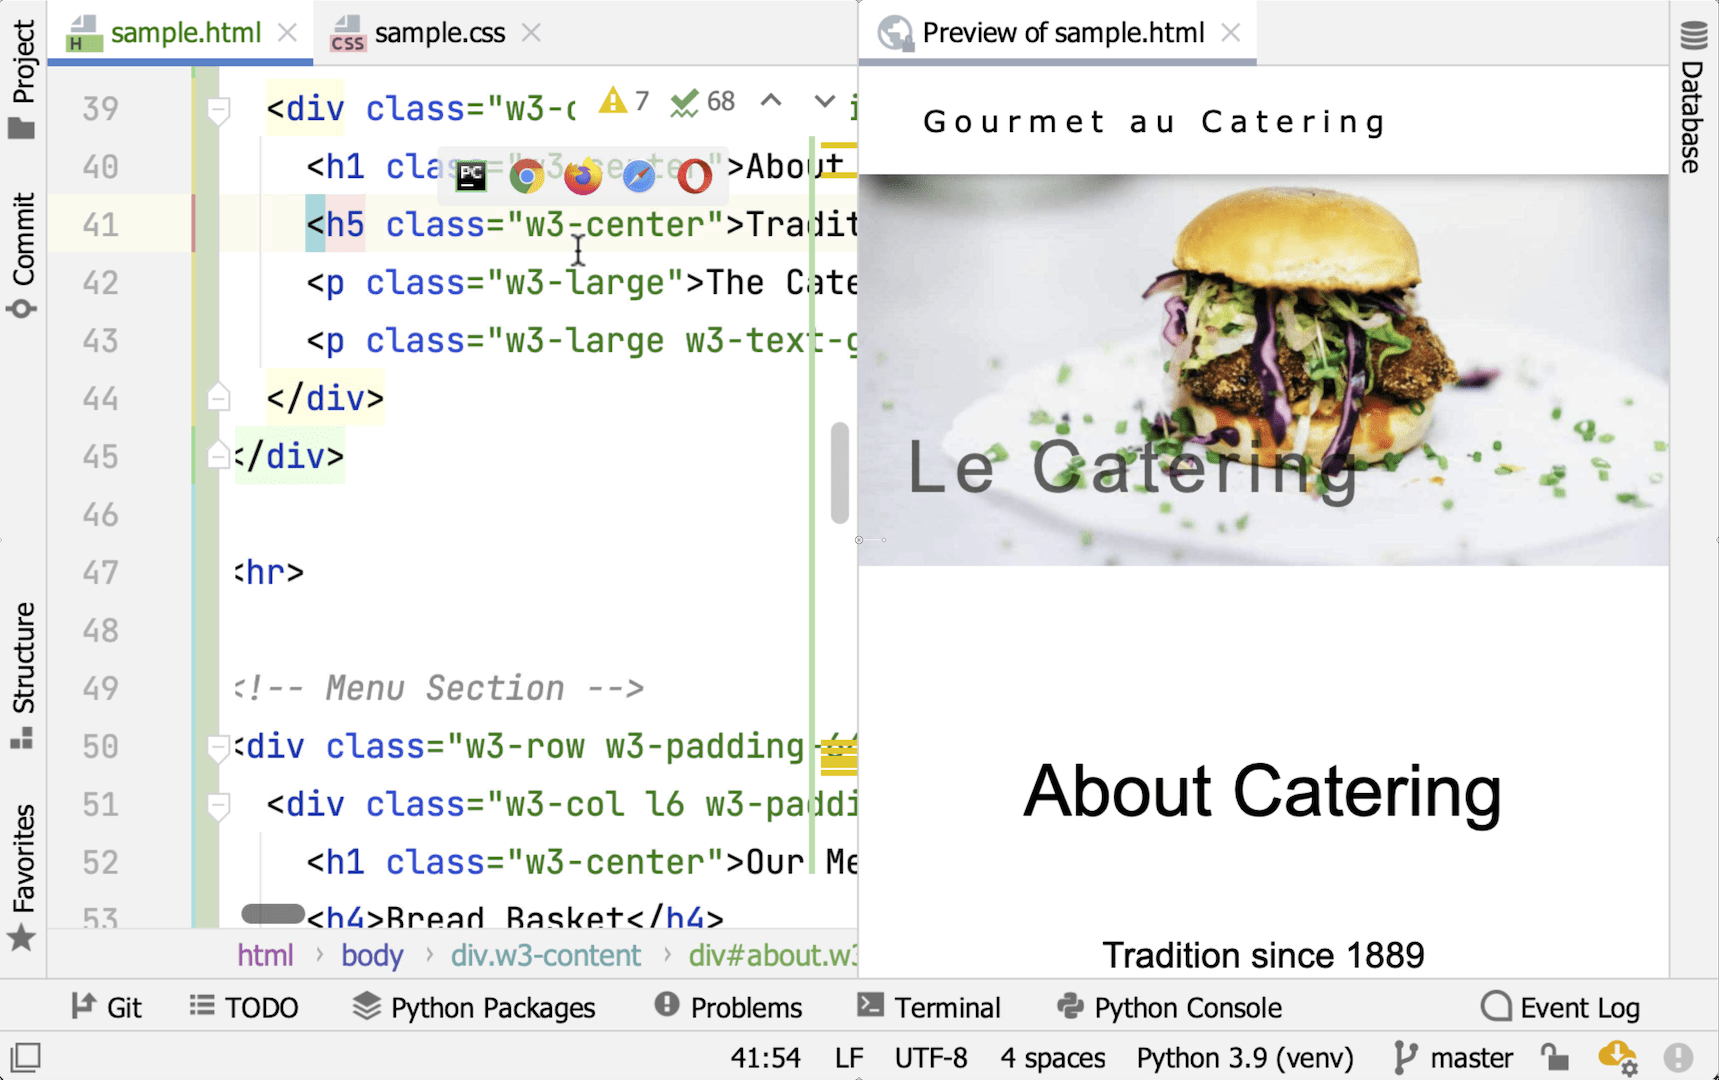 Built-in HTML preview